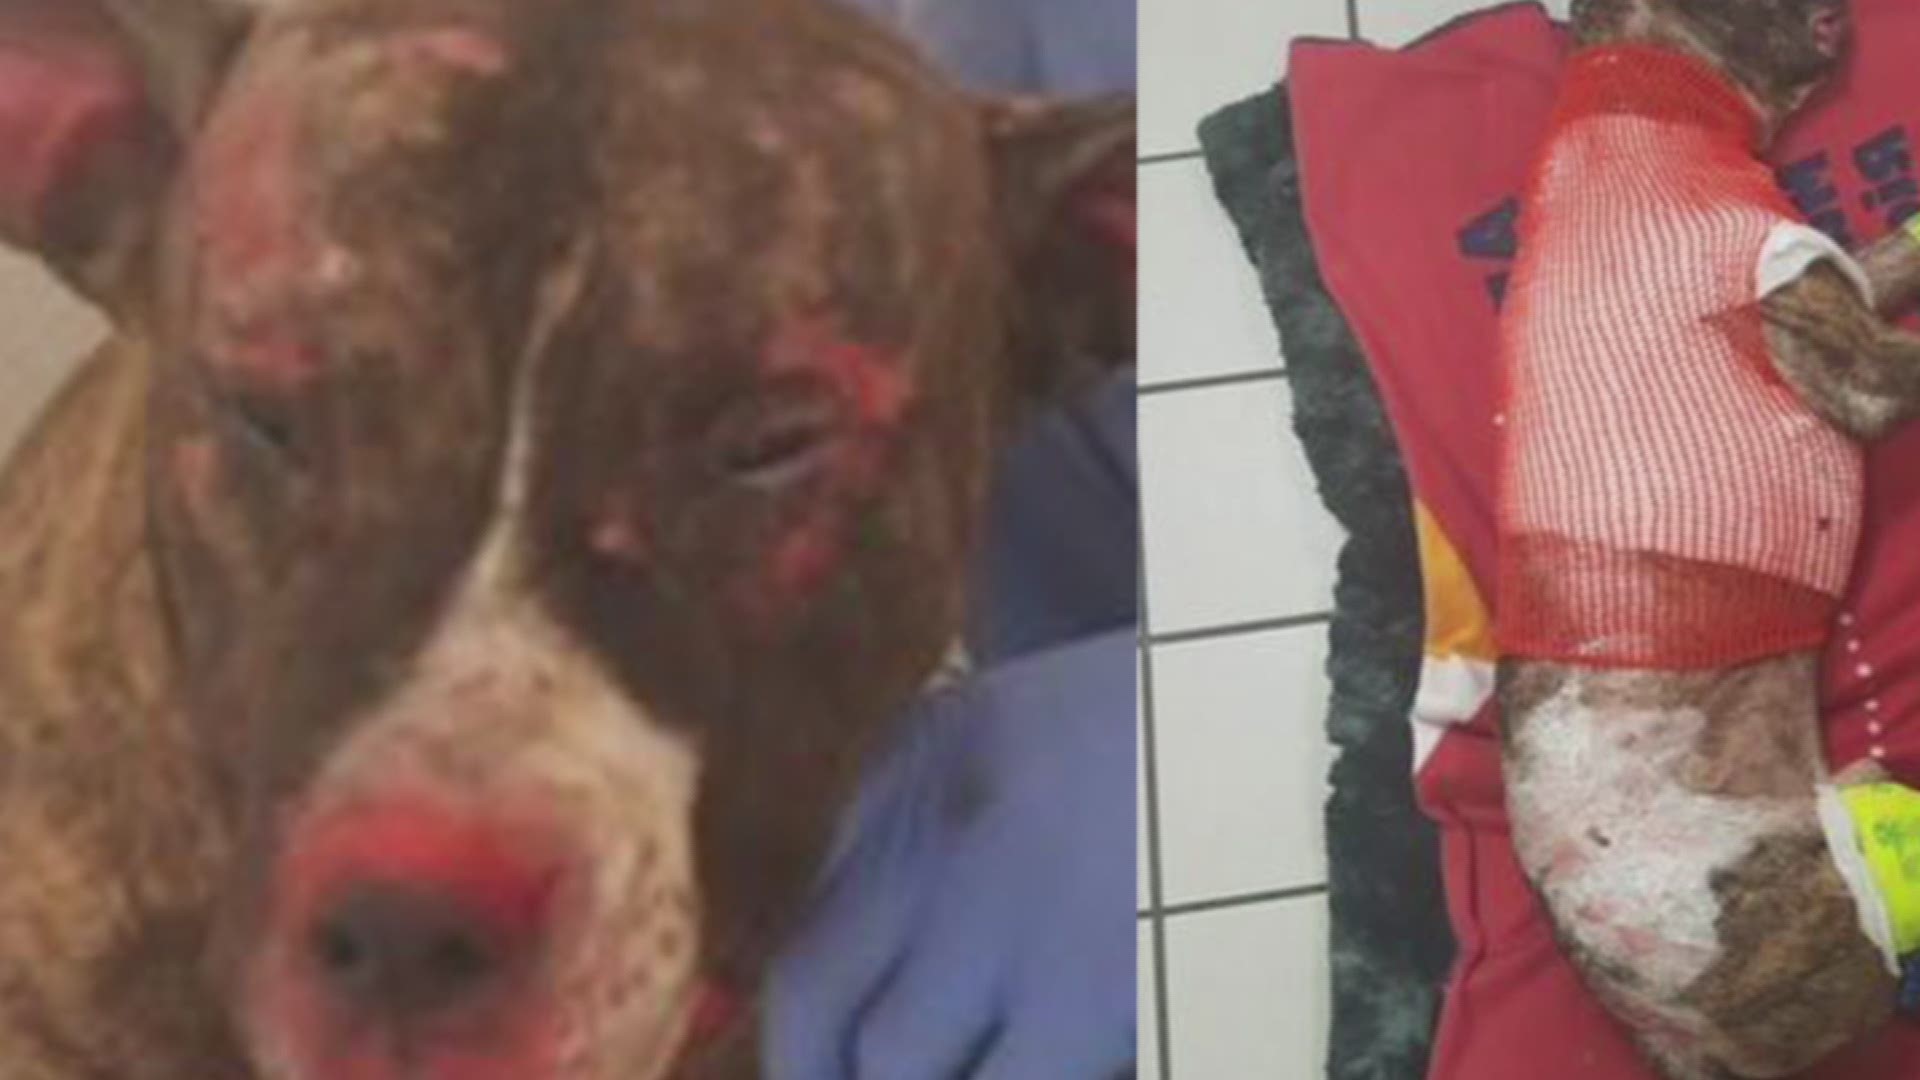 A dog was tied to a pole and intentionally set on fire in a Richmond park.